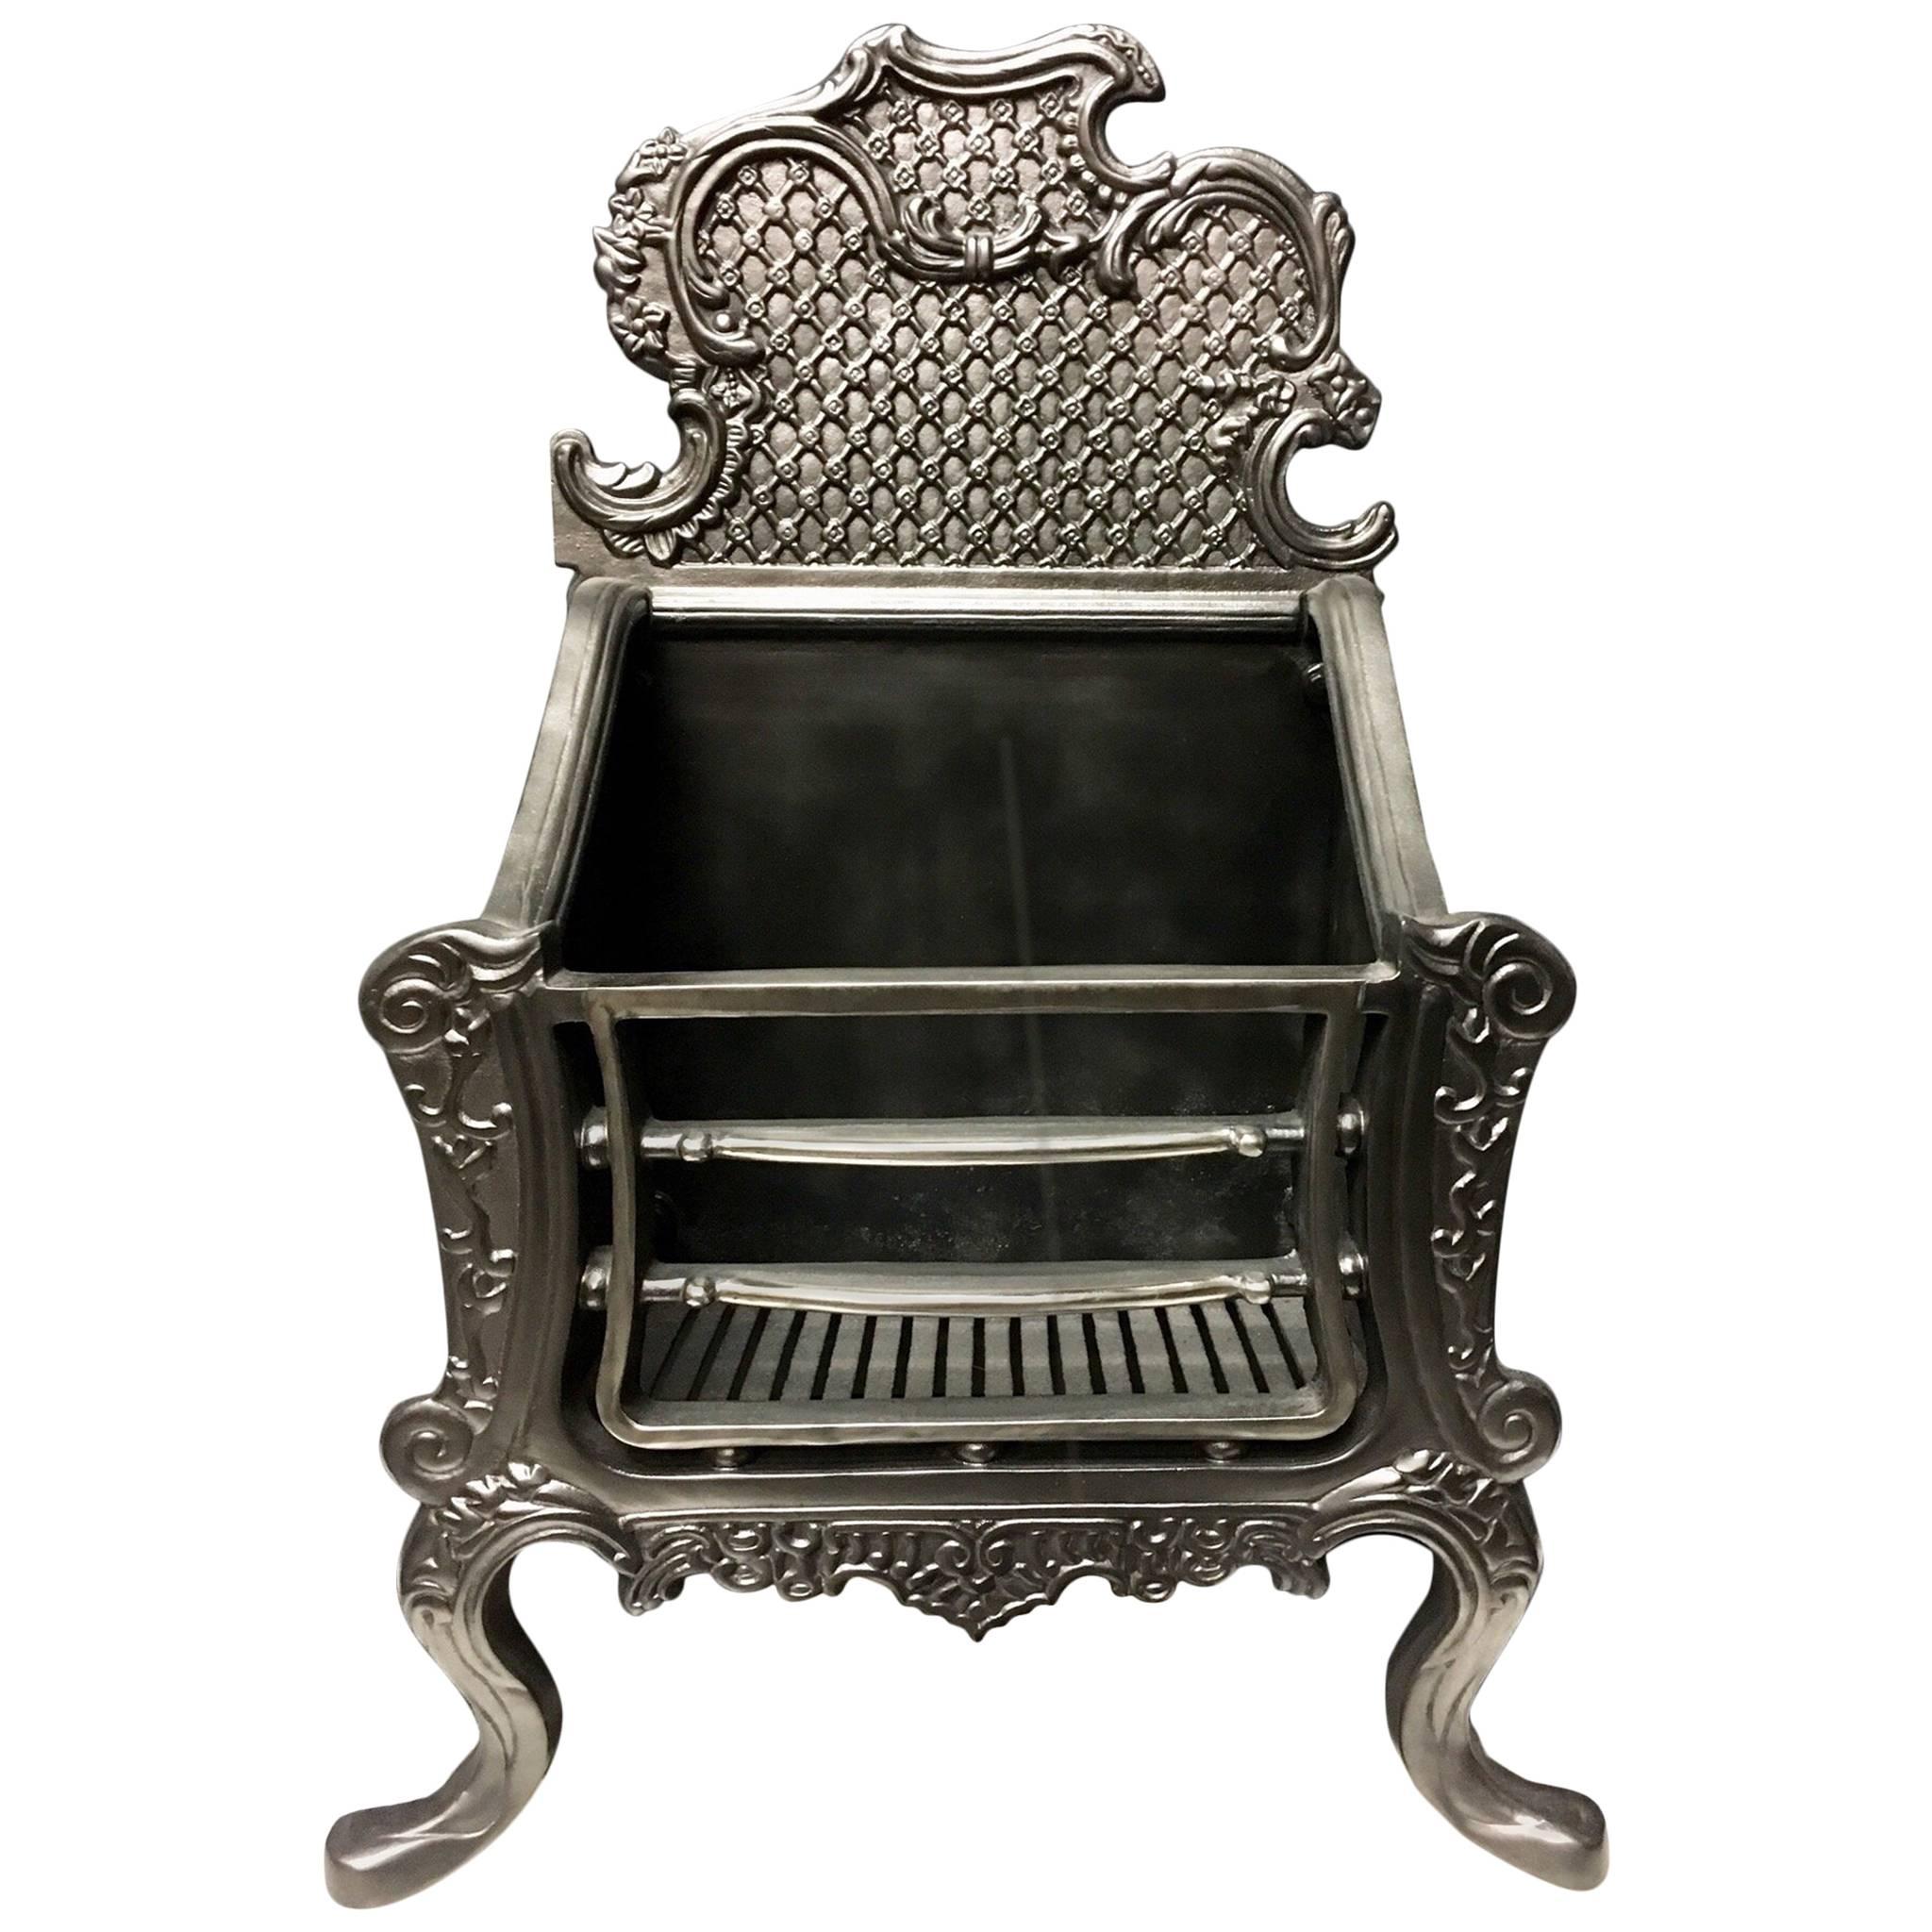 Tall Period Cast Iron Rococo Style Fire Grate For Sale